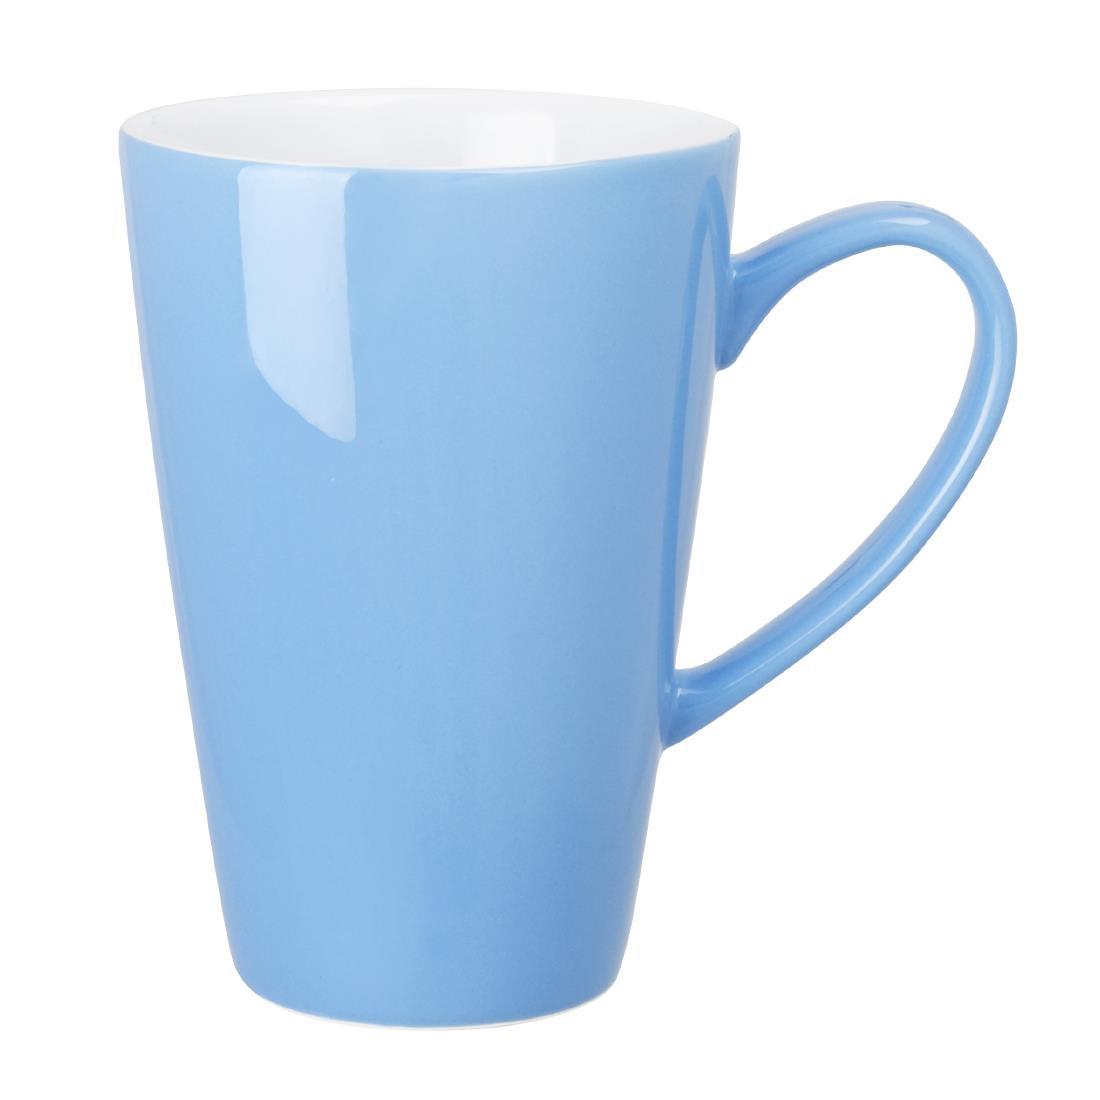 Olympia Cafe Latte Cup Blue 454ml (Pack of 12) - HC405  - 1